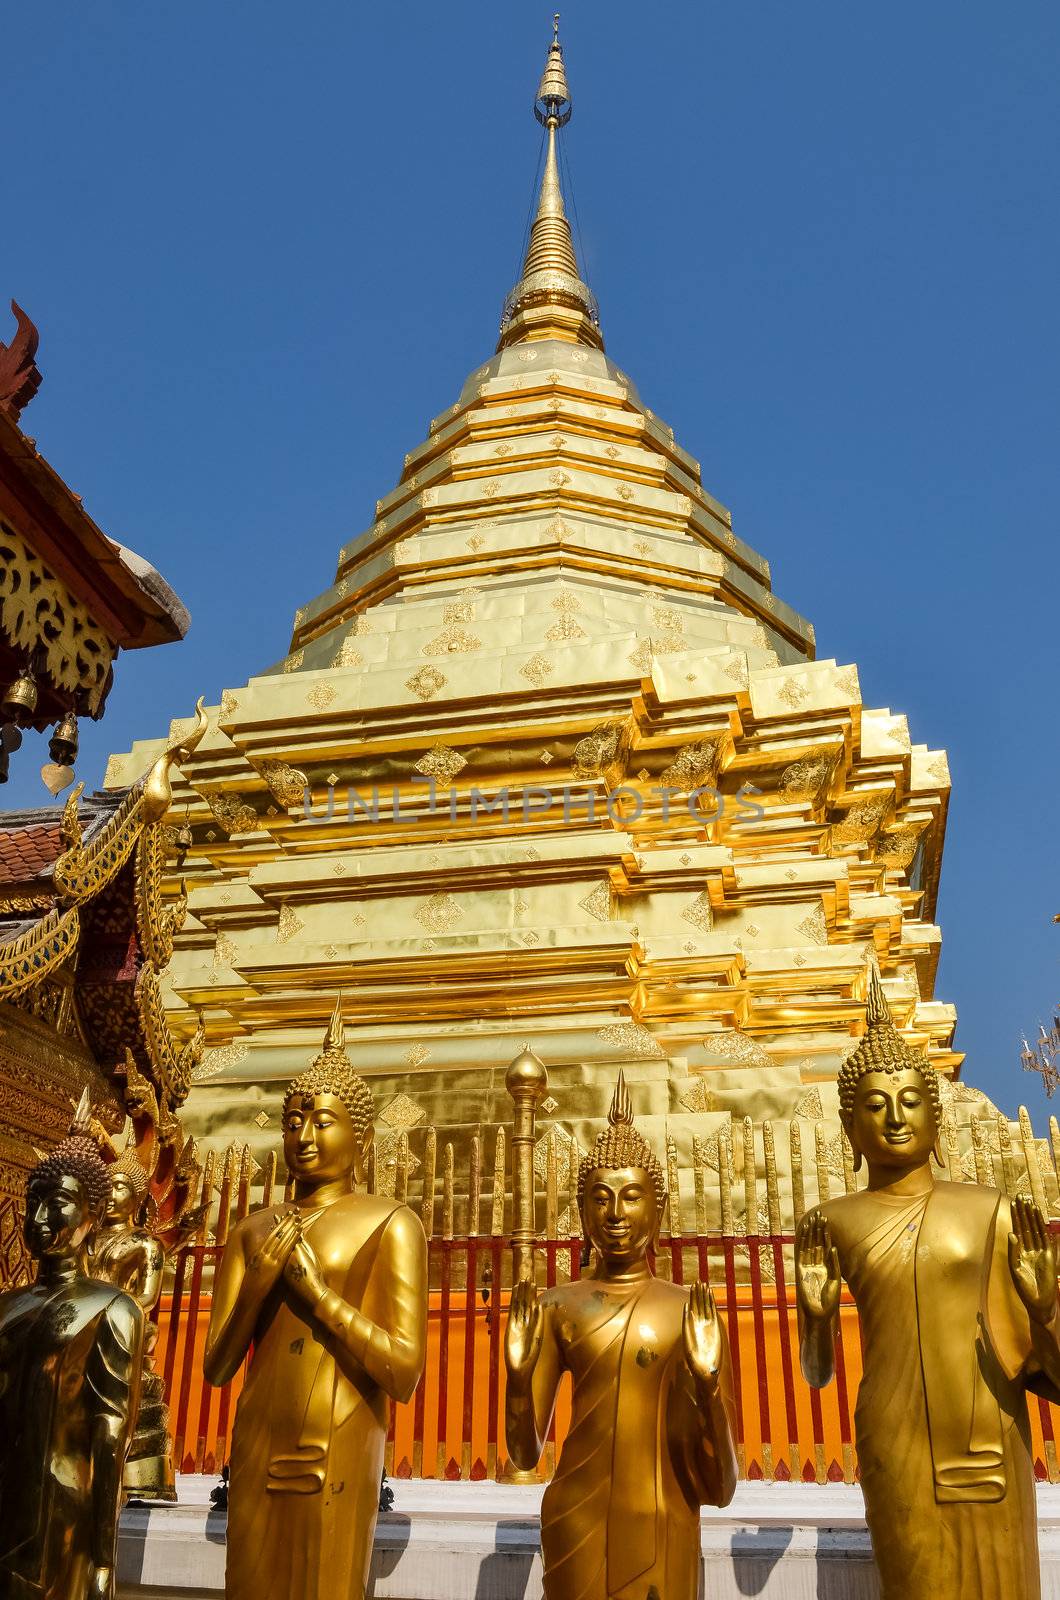 Golden temple and statues at Wat phra That in Doi Suthep, Chiang Mai, Northern Thailand